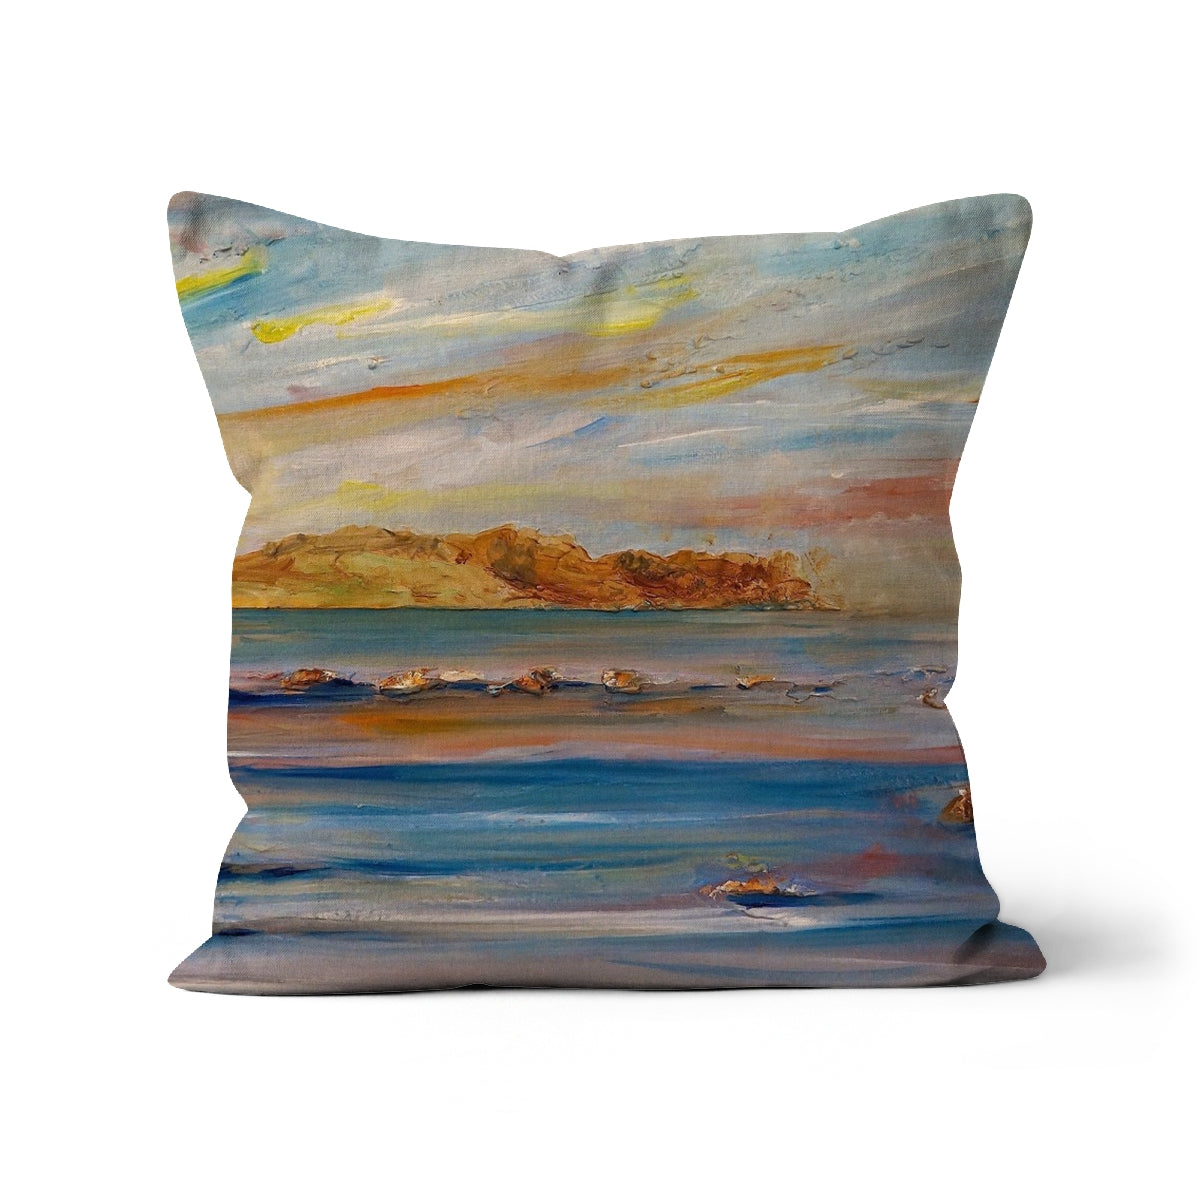 Tiree Dawn Art Gifts Cushion-Cushions-Hebridean Islands Art Gallery-Linen-16"x16"-Paintings, Prints, Homeware, Art Gifts From Scotland By Scottish Artist Kevin Hunter